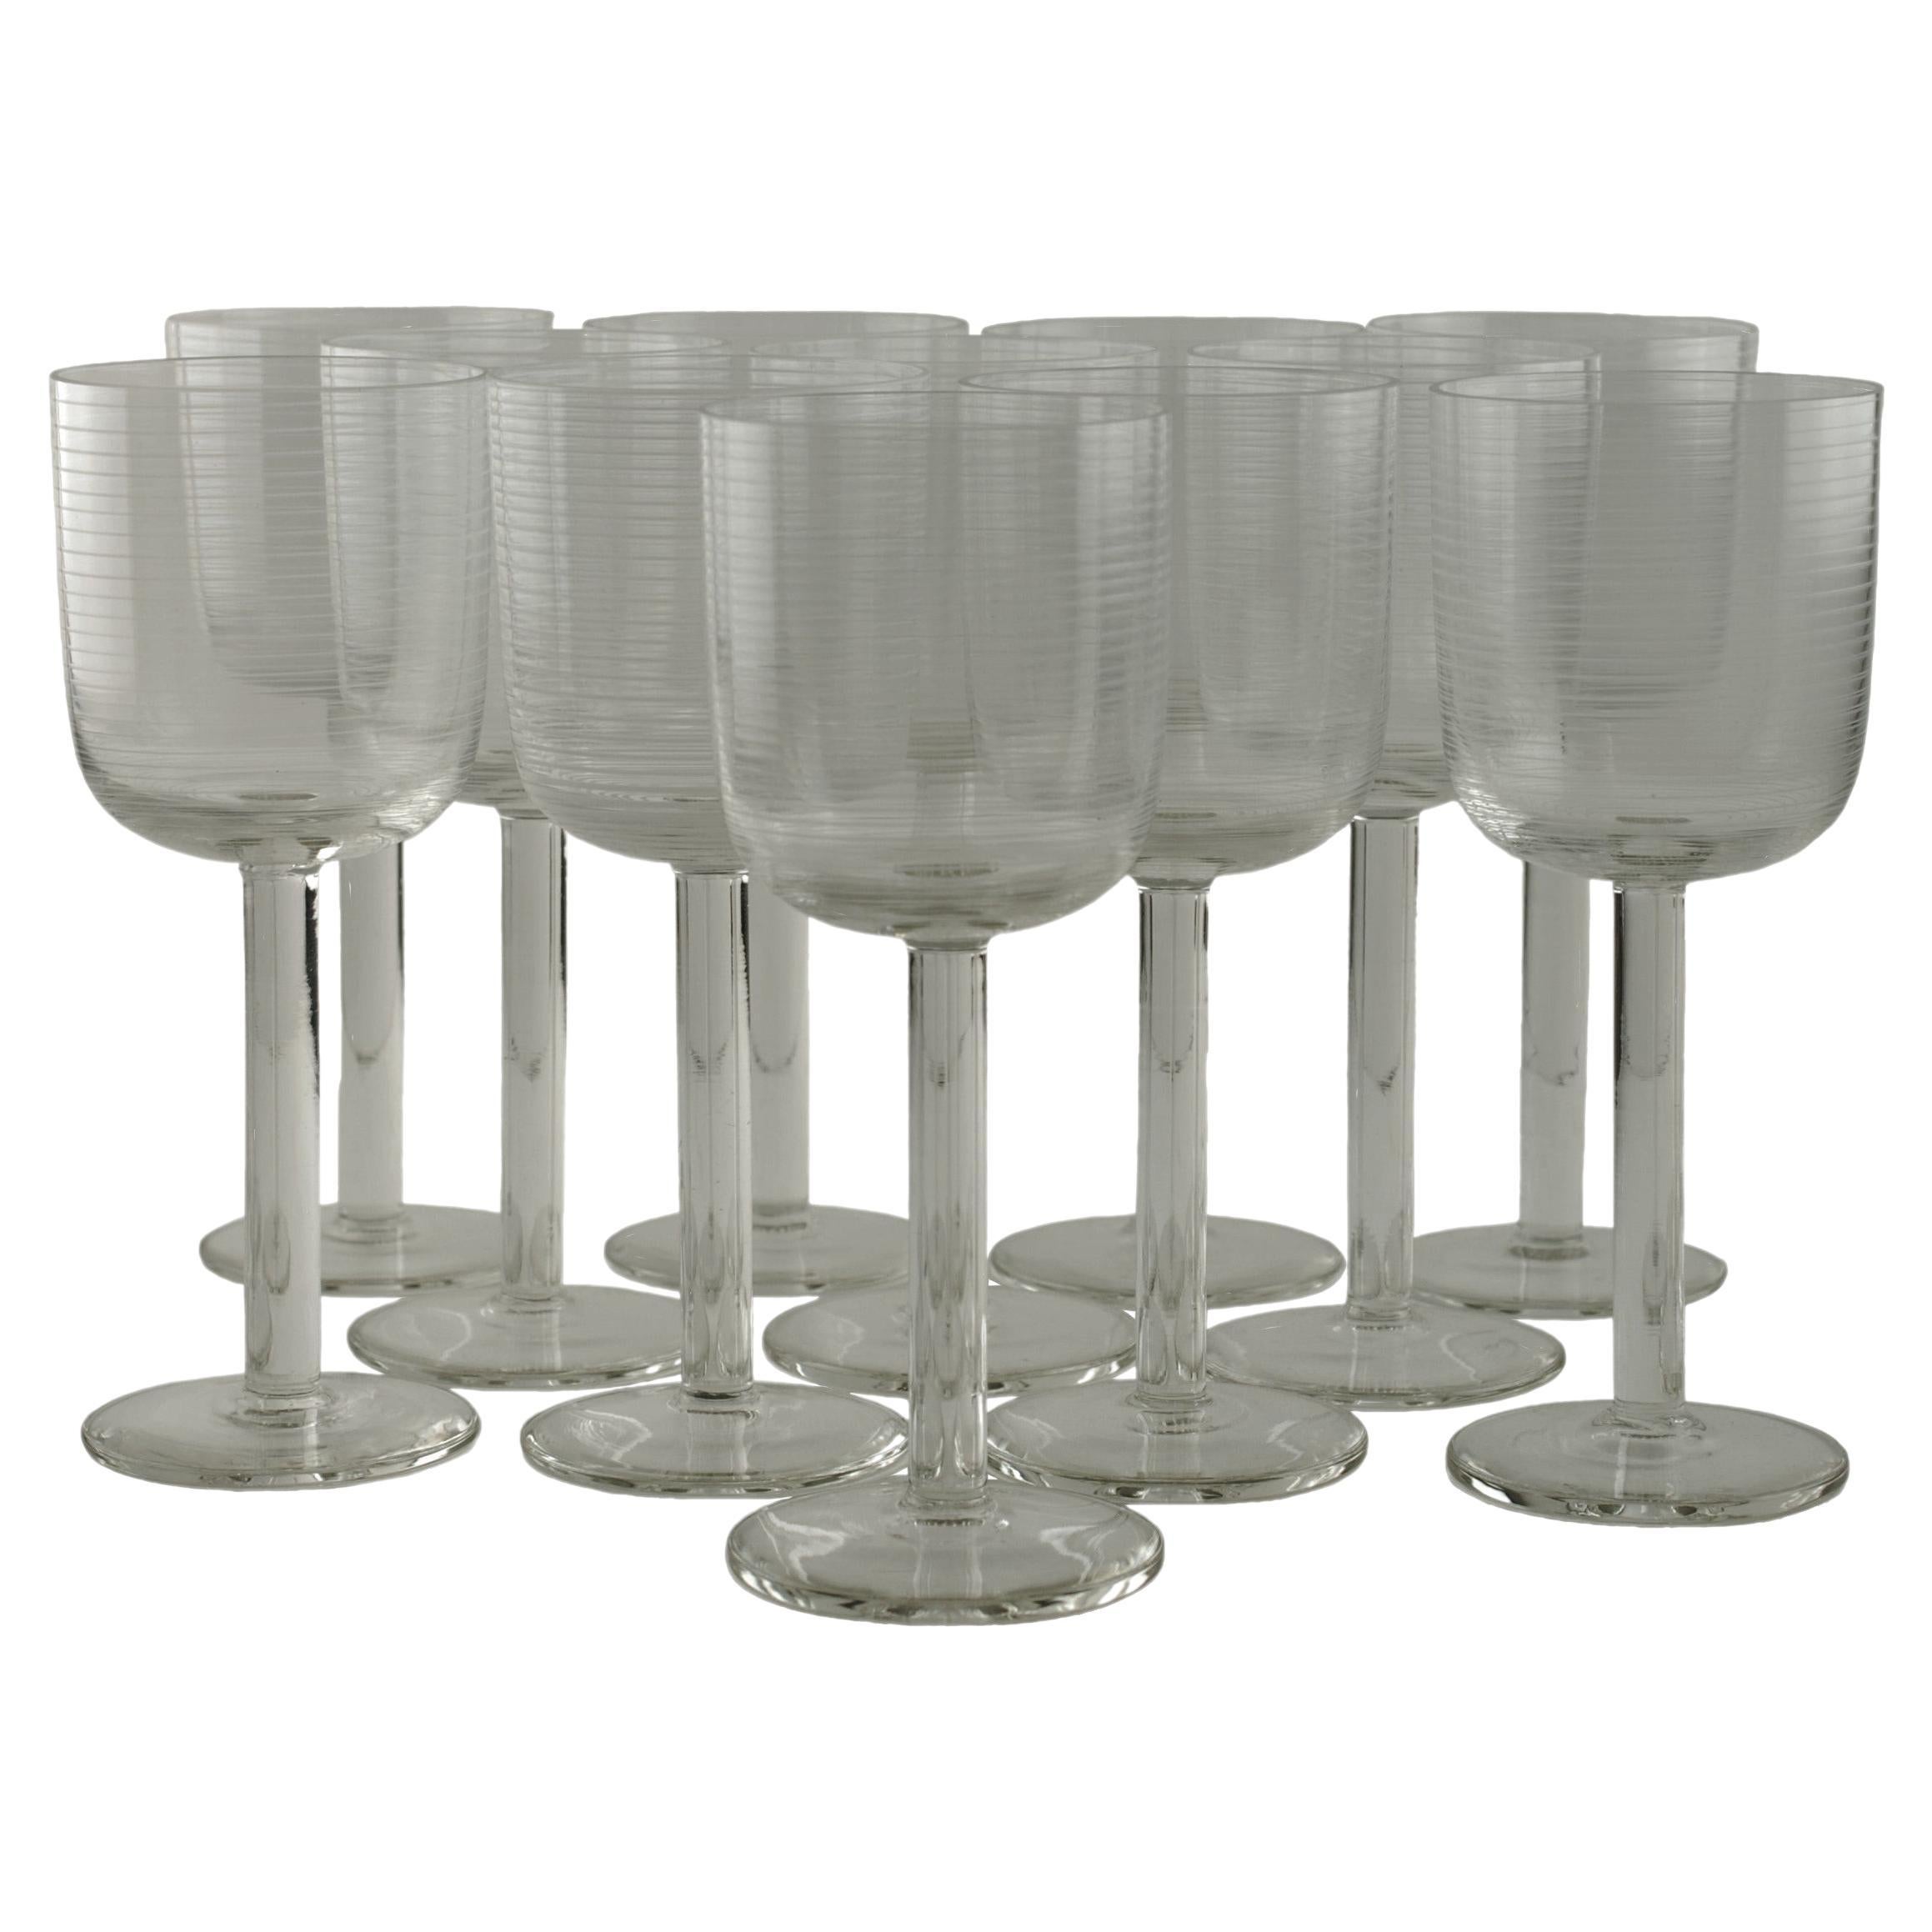 Handblown Clear Venetian Glass Goblets with Threaded Decoration Set of 12